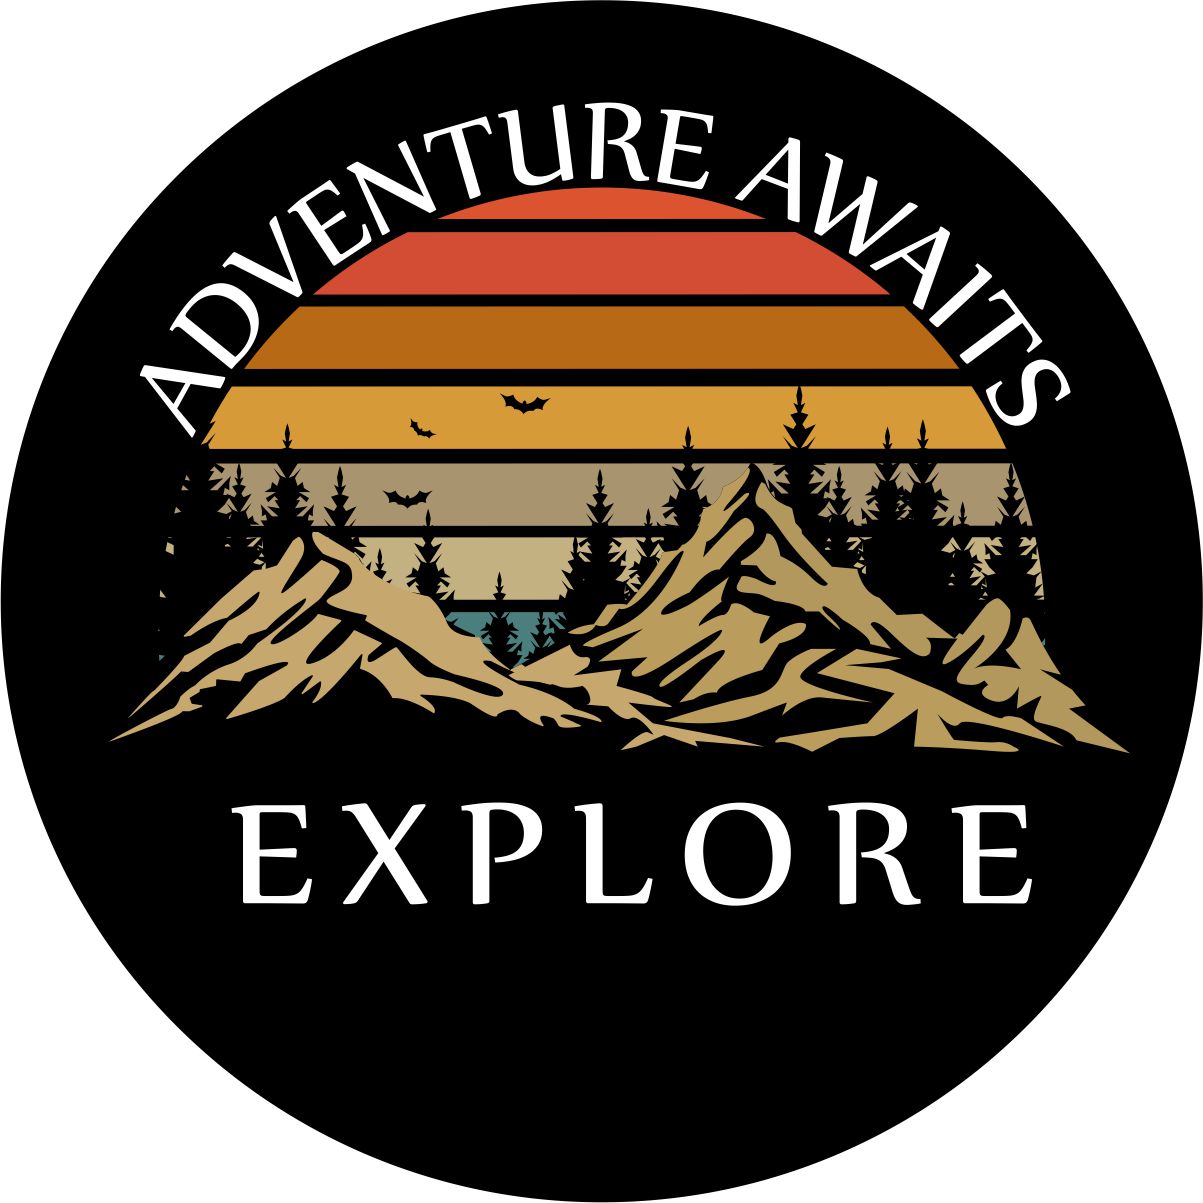 Black vinyl unique tire cover  design. Adventure awaits and explore written around mountains and layered striped lines to mimic that beautiful colors of the sky. 